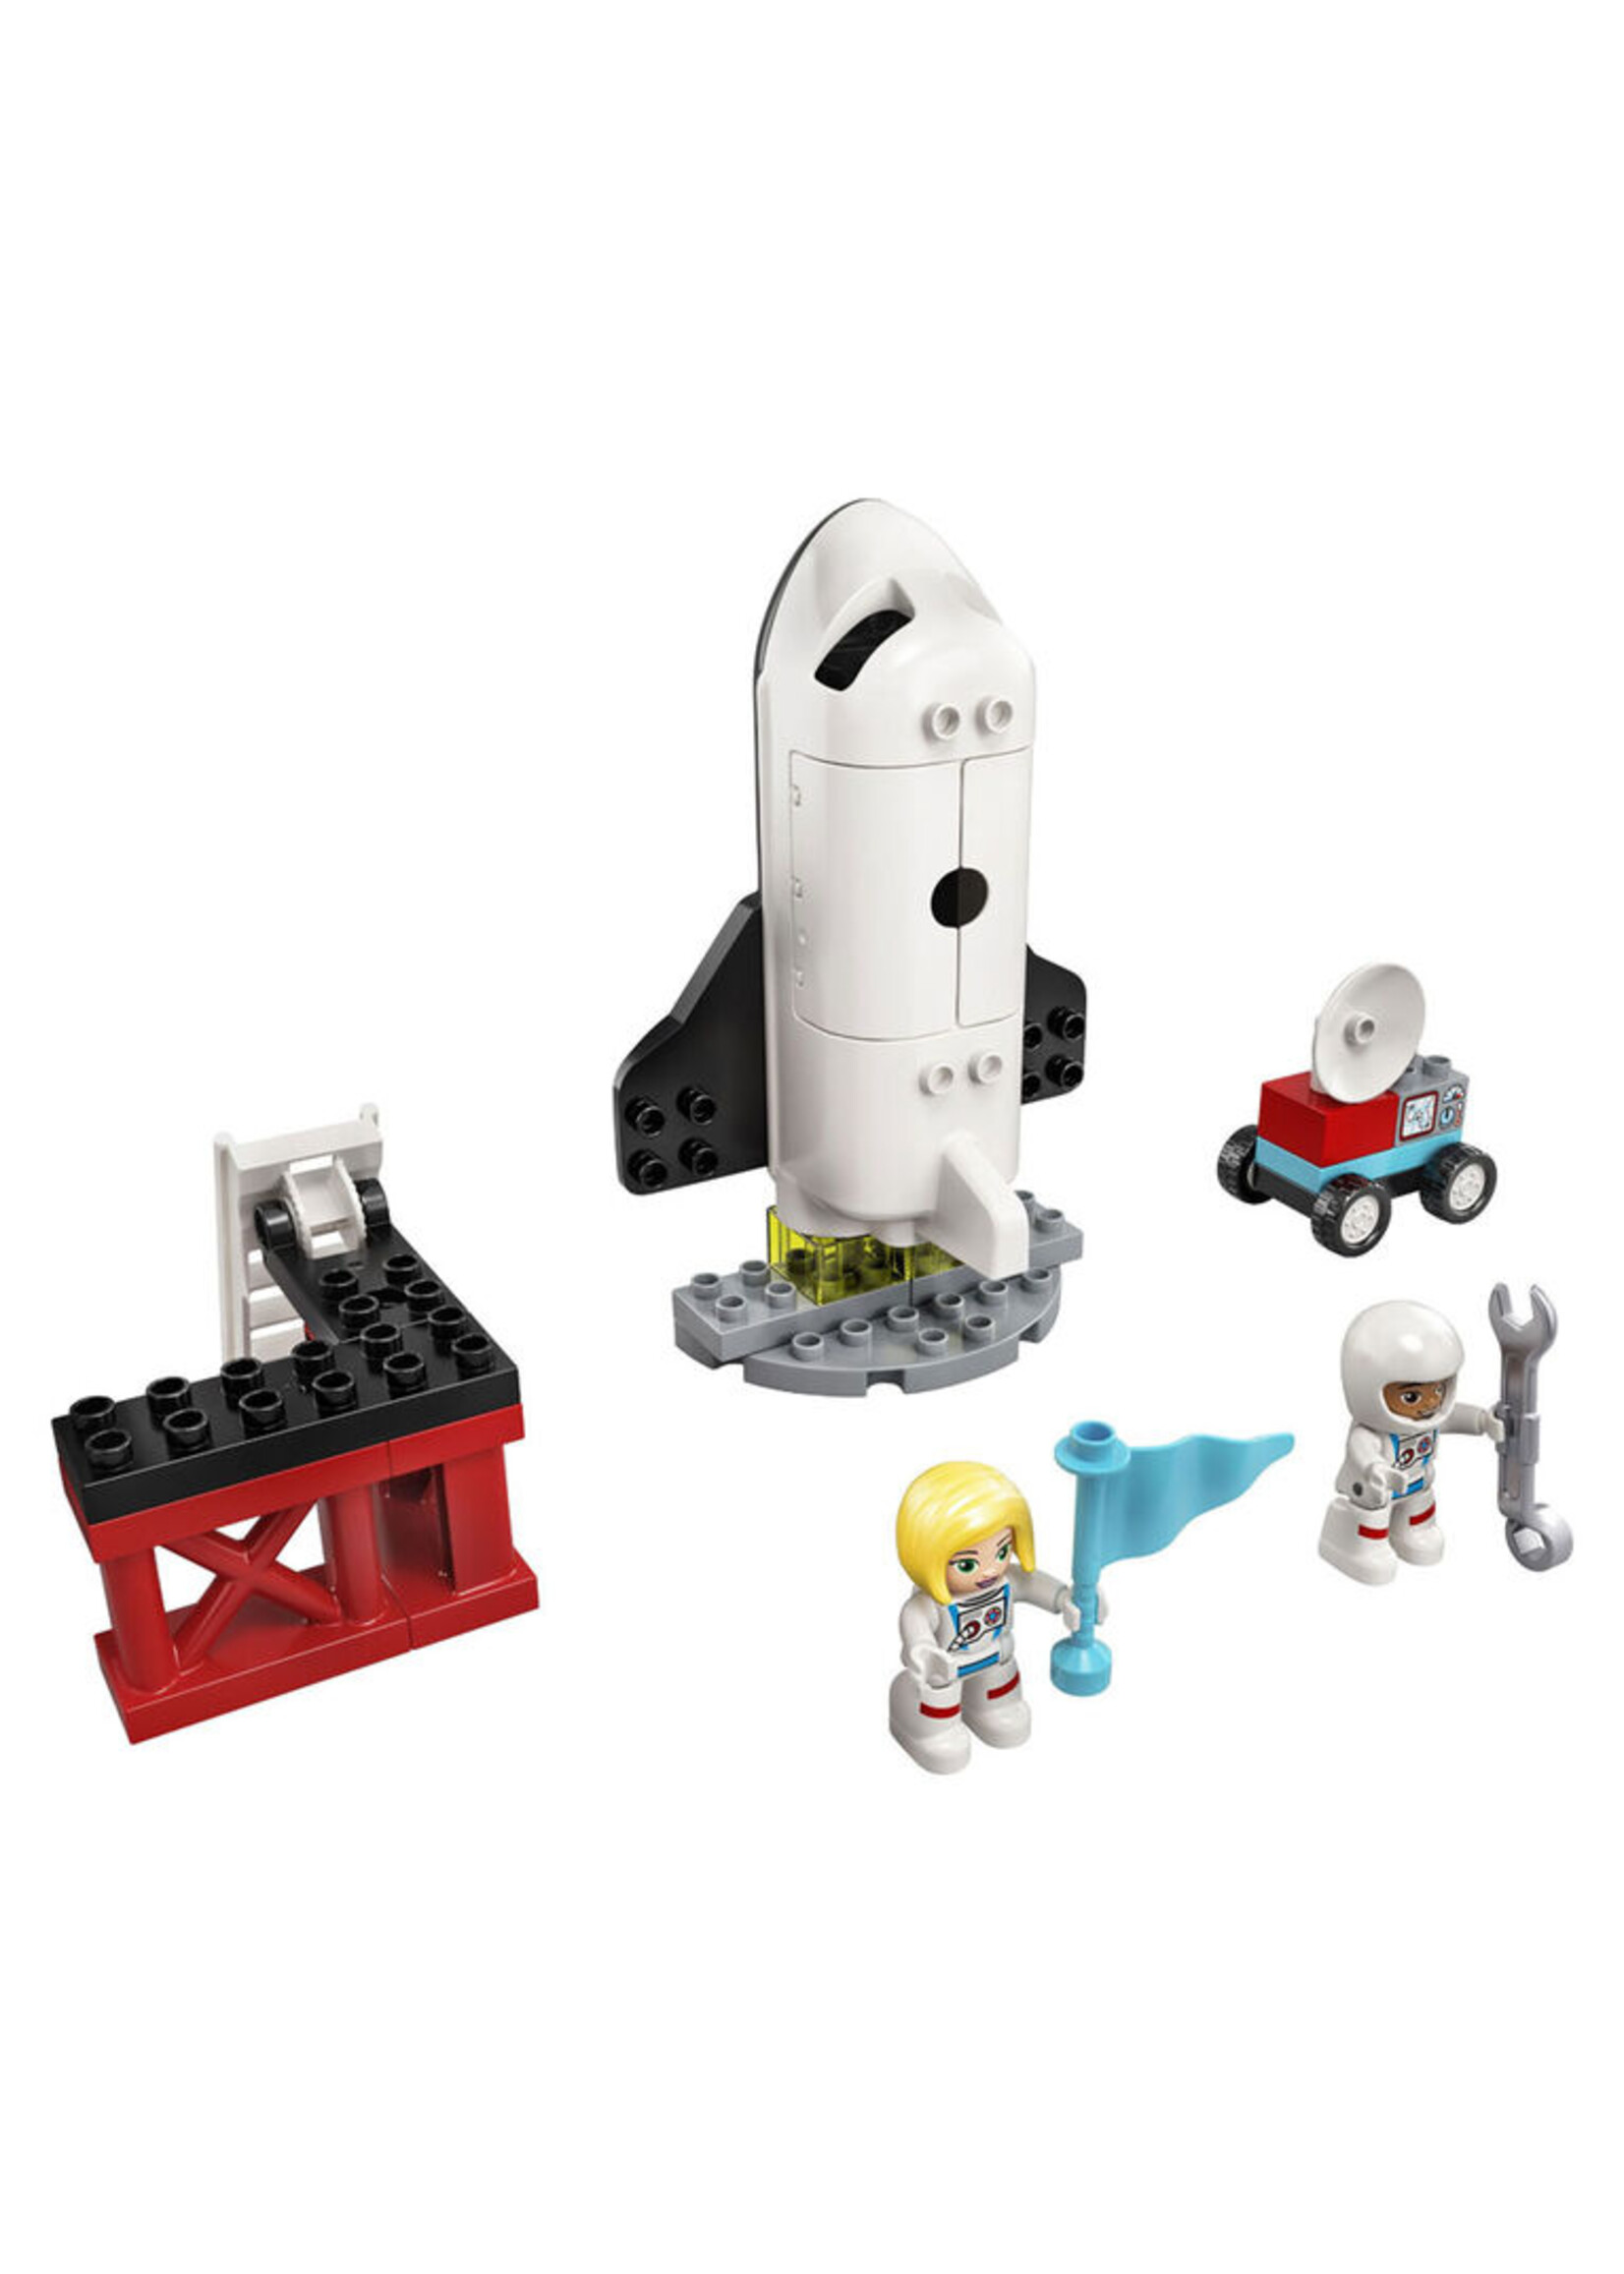 LEGO Duplo Space Shuttle Mission